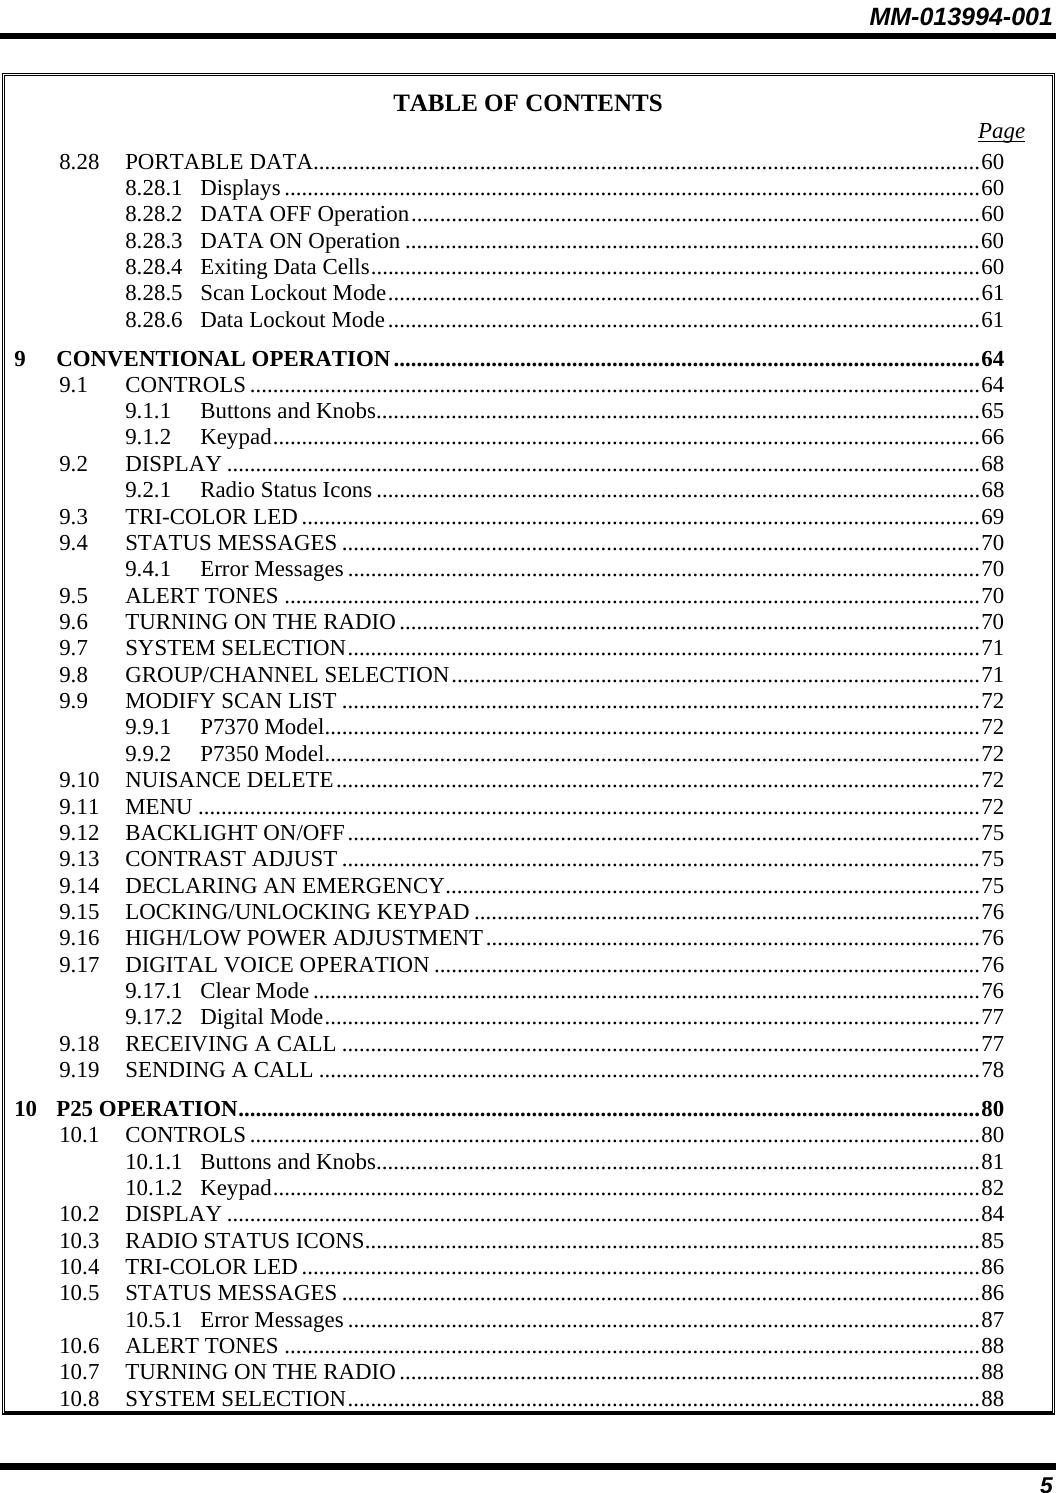 MM-013994-001 5 TABLE OF CONTENTS  Page 8.28 PORTABLE DATA....................................................................................................................60 8.28.1 Displays .........................................................................................................................60 8.28.2 DATA OFF Operation...................................................................................................60 8.28.3 DATA ON Operation ....................................................................................................60 8.28.4 Exiting Data Cells..........................................................................................................60 8.28.5 Scan Lockout Mode.......................................................................................................61 8.28.6 Data Lockout Mode.......................................................................................................61 9 CONVENTIONAL OPERATION......................................................................................................64 9.1 CONTROLS...............................................................................................................................64 9.1.1 Buttons and Knobs.........................................................................................................65 9.1.2 Keypad...........................................................................................................................66 9.2 DISPLAY ...................................................................................................................................68 9.2.1 Radio Status Icons .........................................................................................................68 9.3 TRI-COLOR LED......................................................................................................................69 9.4 STATUS MESSAGES ...............................................................................................................70 9.4.1 Error Messages ..............................................................................................................70 9.5 ALERT TONES .........................................................................................................................70 9.6 TURNING ON THE RADIO.....................................................................................................70 9.7 SYSTEM SELECTION..............................................................................................................71 9.8 GROUP/CHANNEL SELECTION............................................................................................71 9.9 MODIFY SCAN LIST ...............................................................................................................72 9.9.1 P7370 Model..................................................................................................................72 9.9.2 P7350 Model..................................................................................................................72 9.10 NUISANCE DELETE................................................................................................................72 9.11 MENU ........................................................................................................................................72 9.12 BACKLIGHT ON/OFF..............................................................................................................75 9.13 CONTRAST ADJUST ...............................................................................................................75 9.14 DECLARING AN EMERGENCY.............................................................................................75 9.15 LOCKING/UNLOCKING KEYPAD ........................................................................................76 9.16 HIGH/LOW POWER ADJUSTMENT......................................................................................76 9.17 DIGITAL VOICE OPERATION ...............................................................................................76 9.17.1 Clear Mode....................................................................................................................76 9.17.2 Digital Mode..................................................................................................................77 9.18 RECEIVING A CALL ...............................................................................................................77 9.19 SENDING A CALL ...................................................................................................................78 10 P25 OPERATION.................................................................................................................................80 10.1 CONTROLS...............................................................................................................................80 10.1.1 Buttons and Knobs.........................................................................................................81 10.1.2 Keypad...........................................................................................................................82 10.2 DISPLAY ...................................................................................................................................84 10.3 RADIO STATUS ICONS...........................................................................................................85 10.4 TRI-COLOR LED......................................................................................................................86 10.5 STATUS MESSAGES ...............................................................................................................86 10.5.1 Error Messages ..............................................................................................................87 10.6 ALERT TONES .........................................................................................................................88 10.7 TURNING ON THE RADIO.....................................................................................................88 10.8 SYSTEM SELECTION..............................................................................................................88 